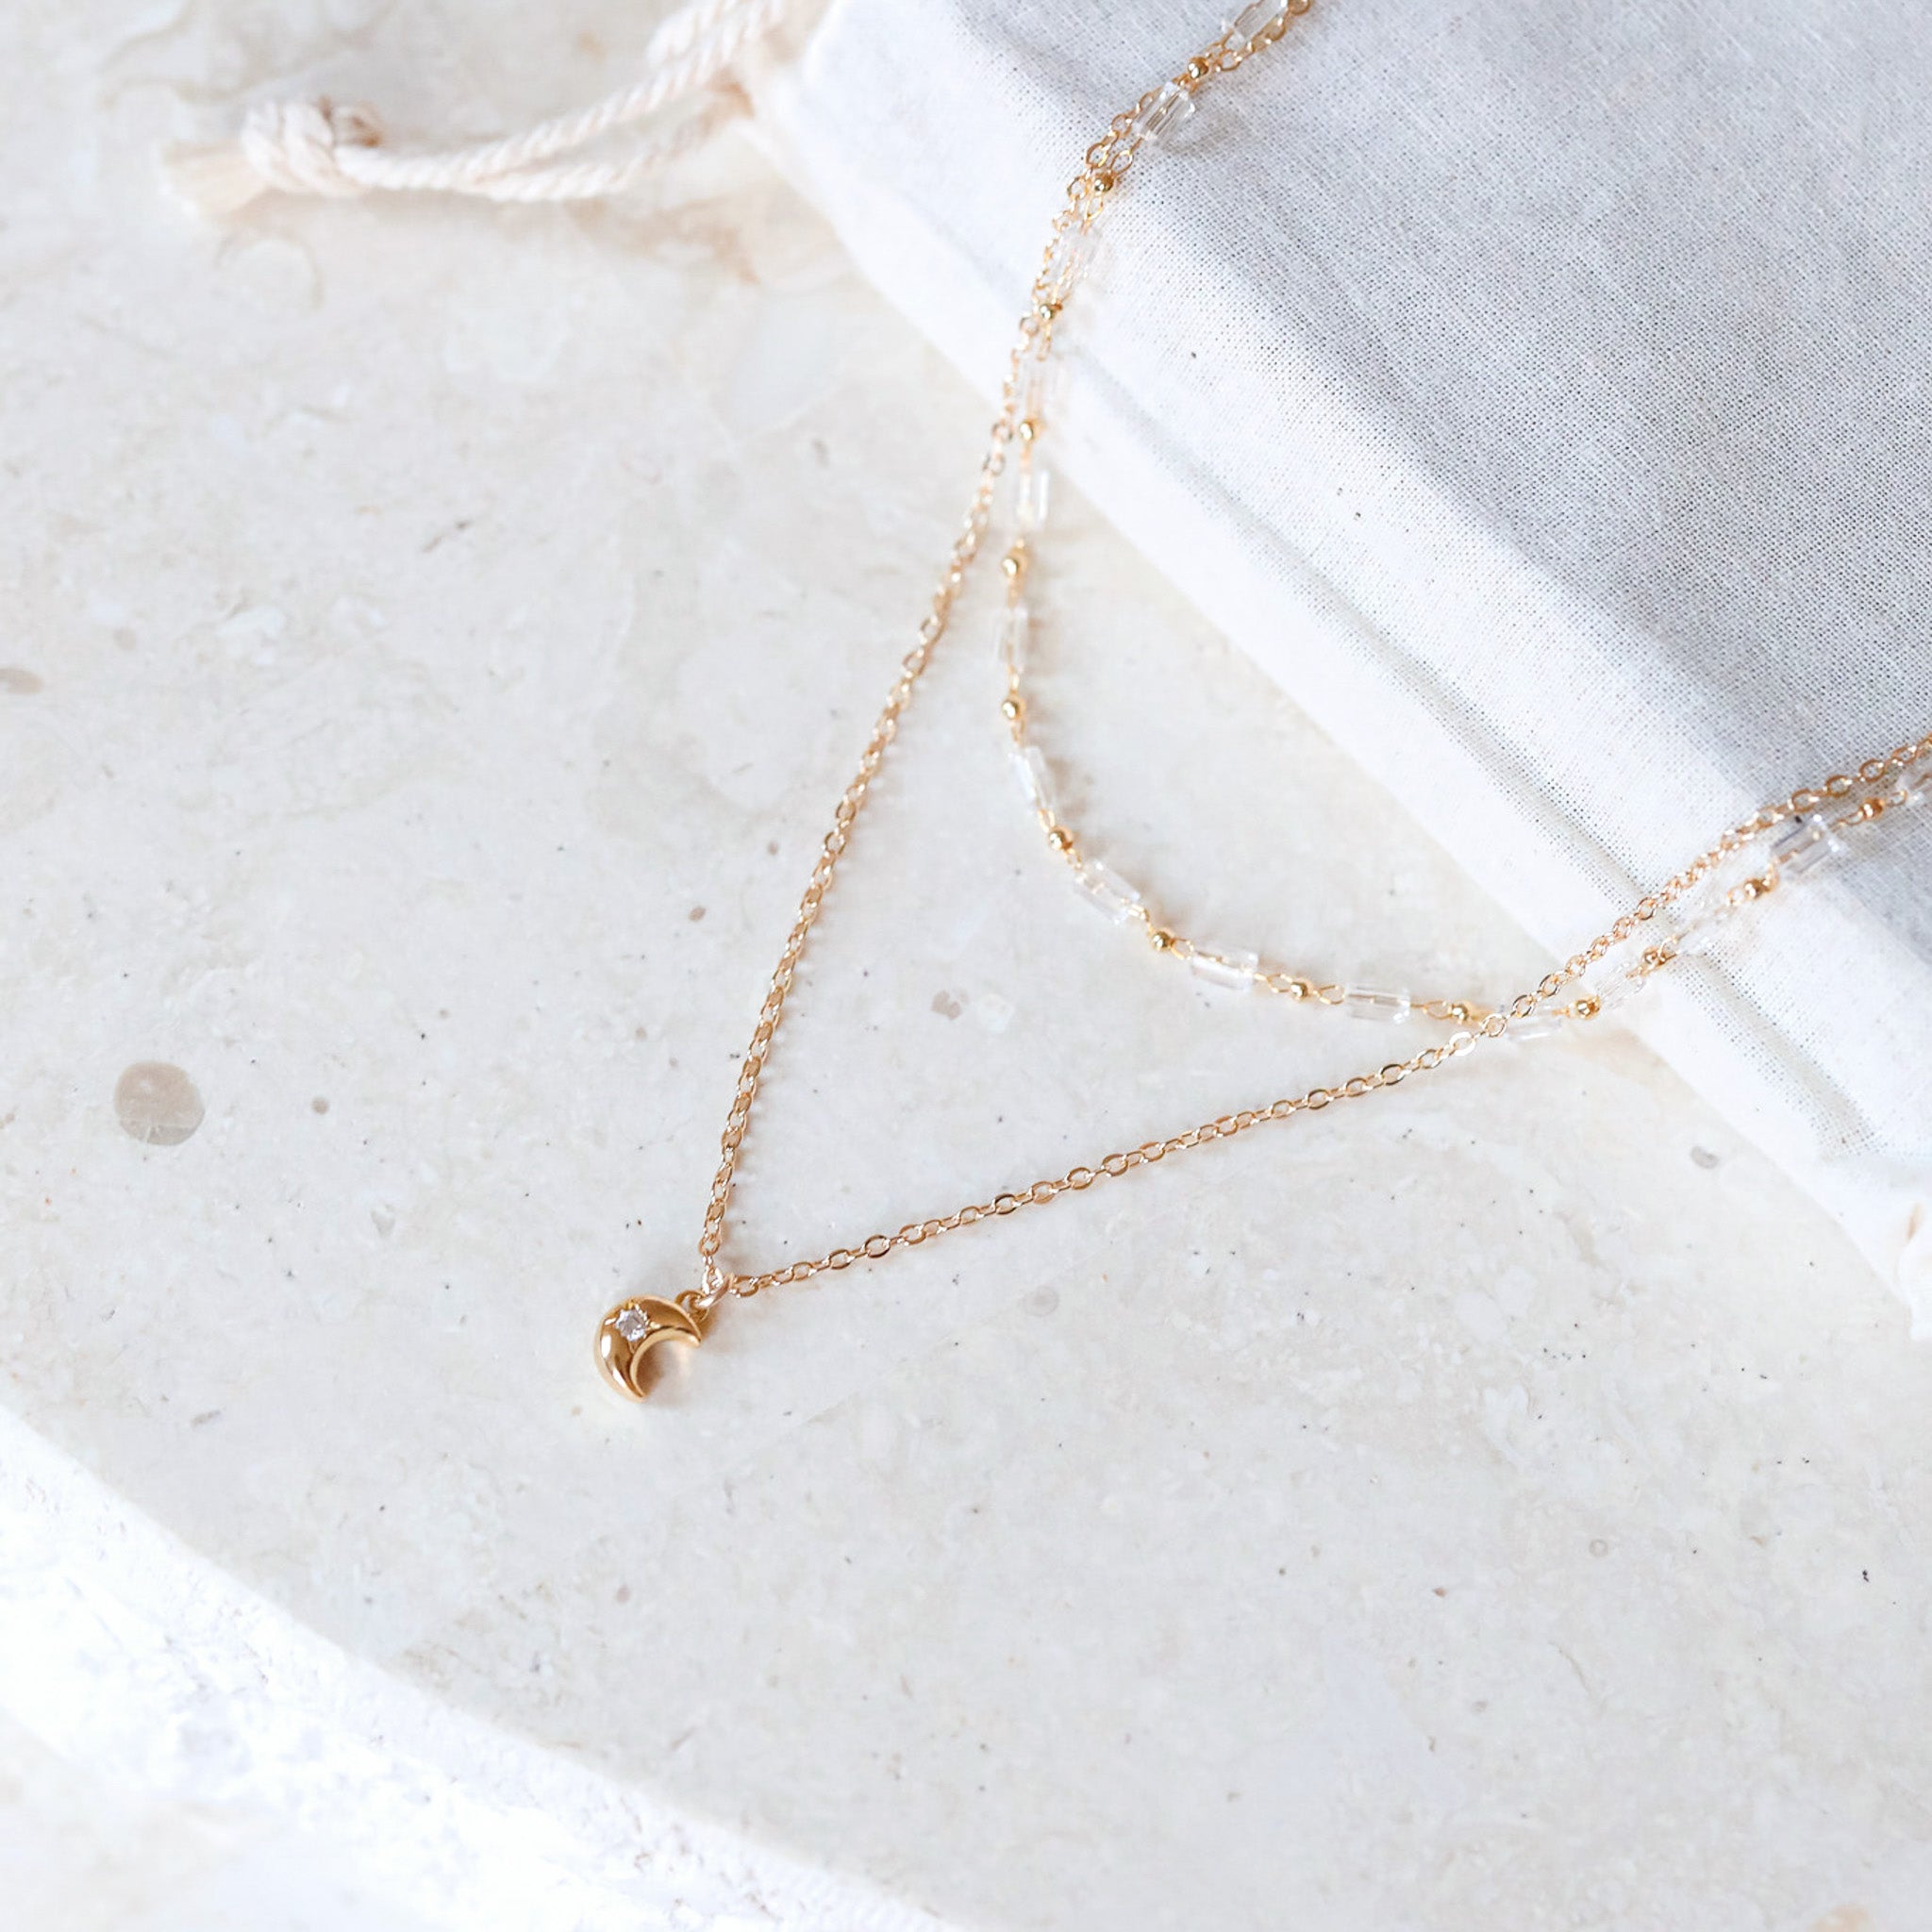 Astra Double Charm Necklace